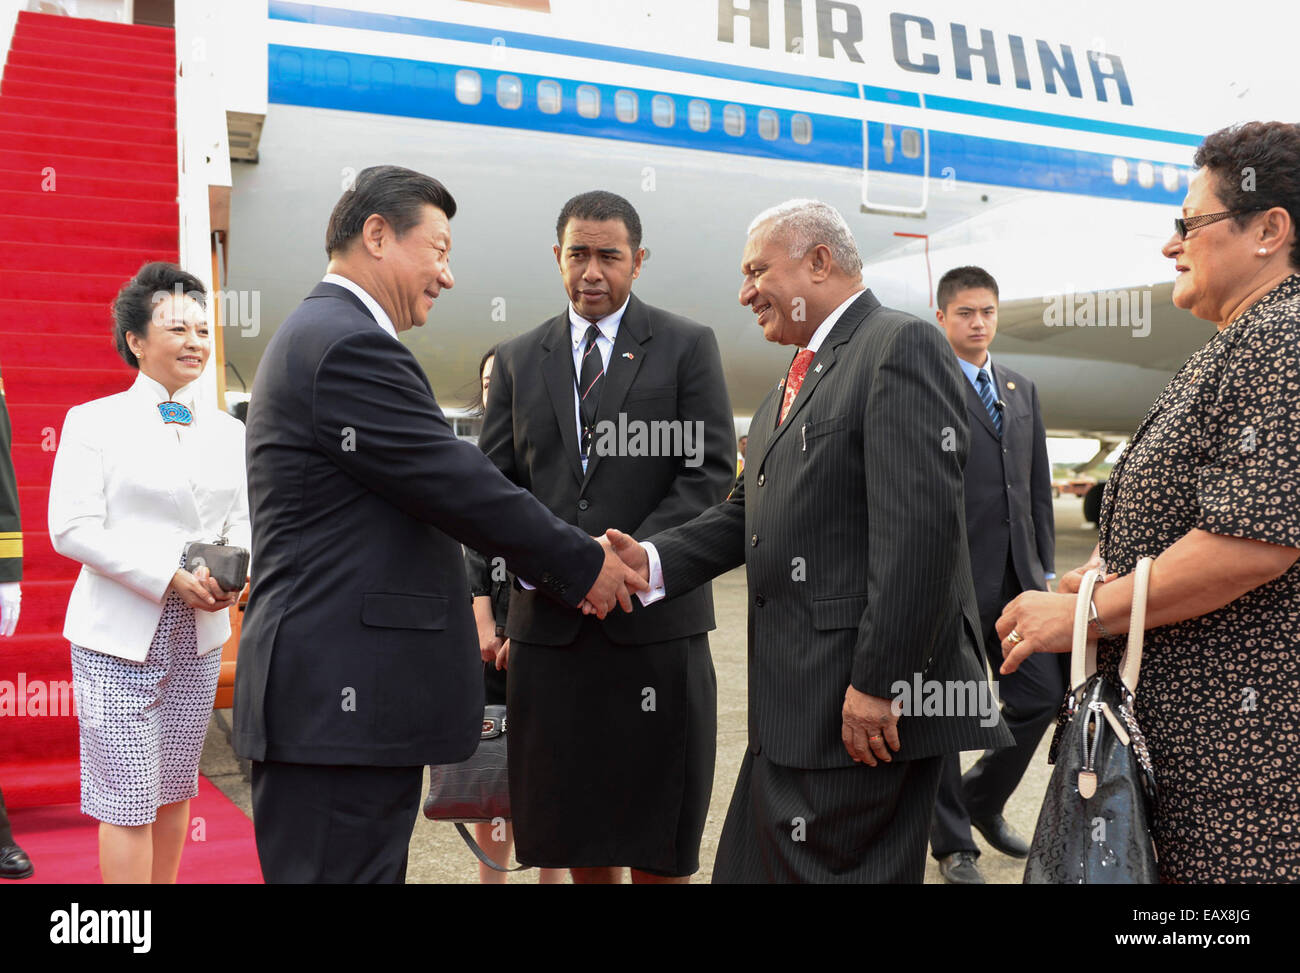 Nadi, Fiji. 21st Nov, 2014. Chinese President Xi Jinping (2nd L) and his wife Peng Liyuan (1st L) are greeted by Fijian Prime Minister Josaia Voreqe Bainimarama (2nd R) and his wife at the airport in Nadi, Fiji, Nov. 21, 2014. Xi is paying a state visit to Fiji, the first in history by a Chinese president. © Li Xueren/Xinhua/Alamy Live News Stock Photo